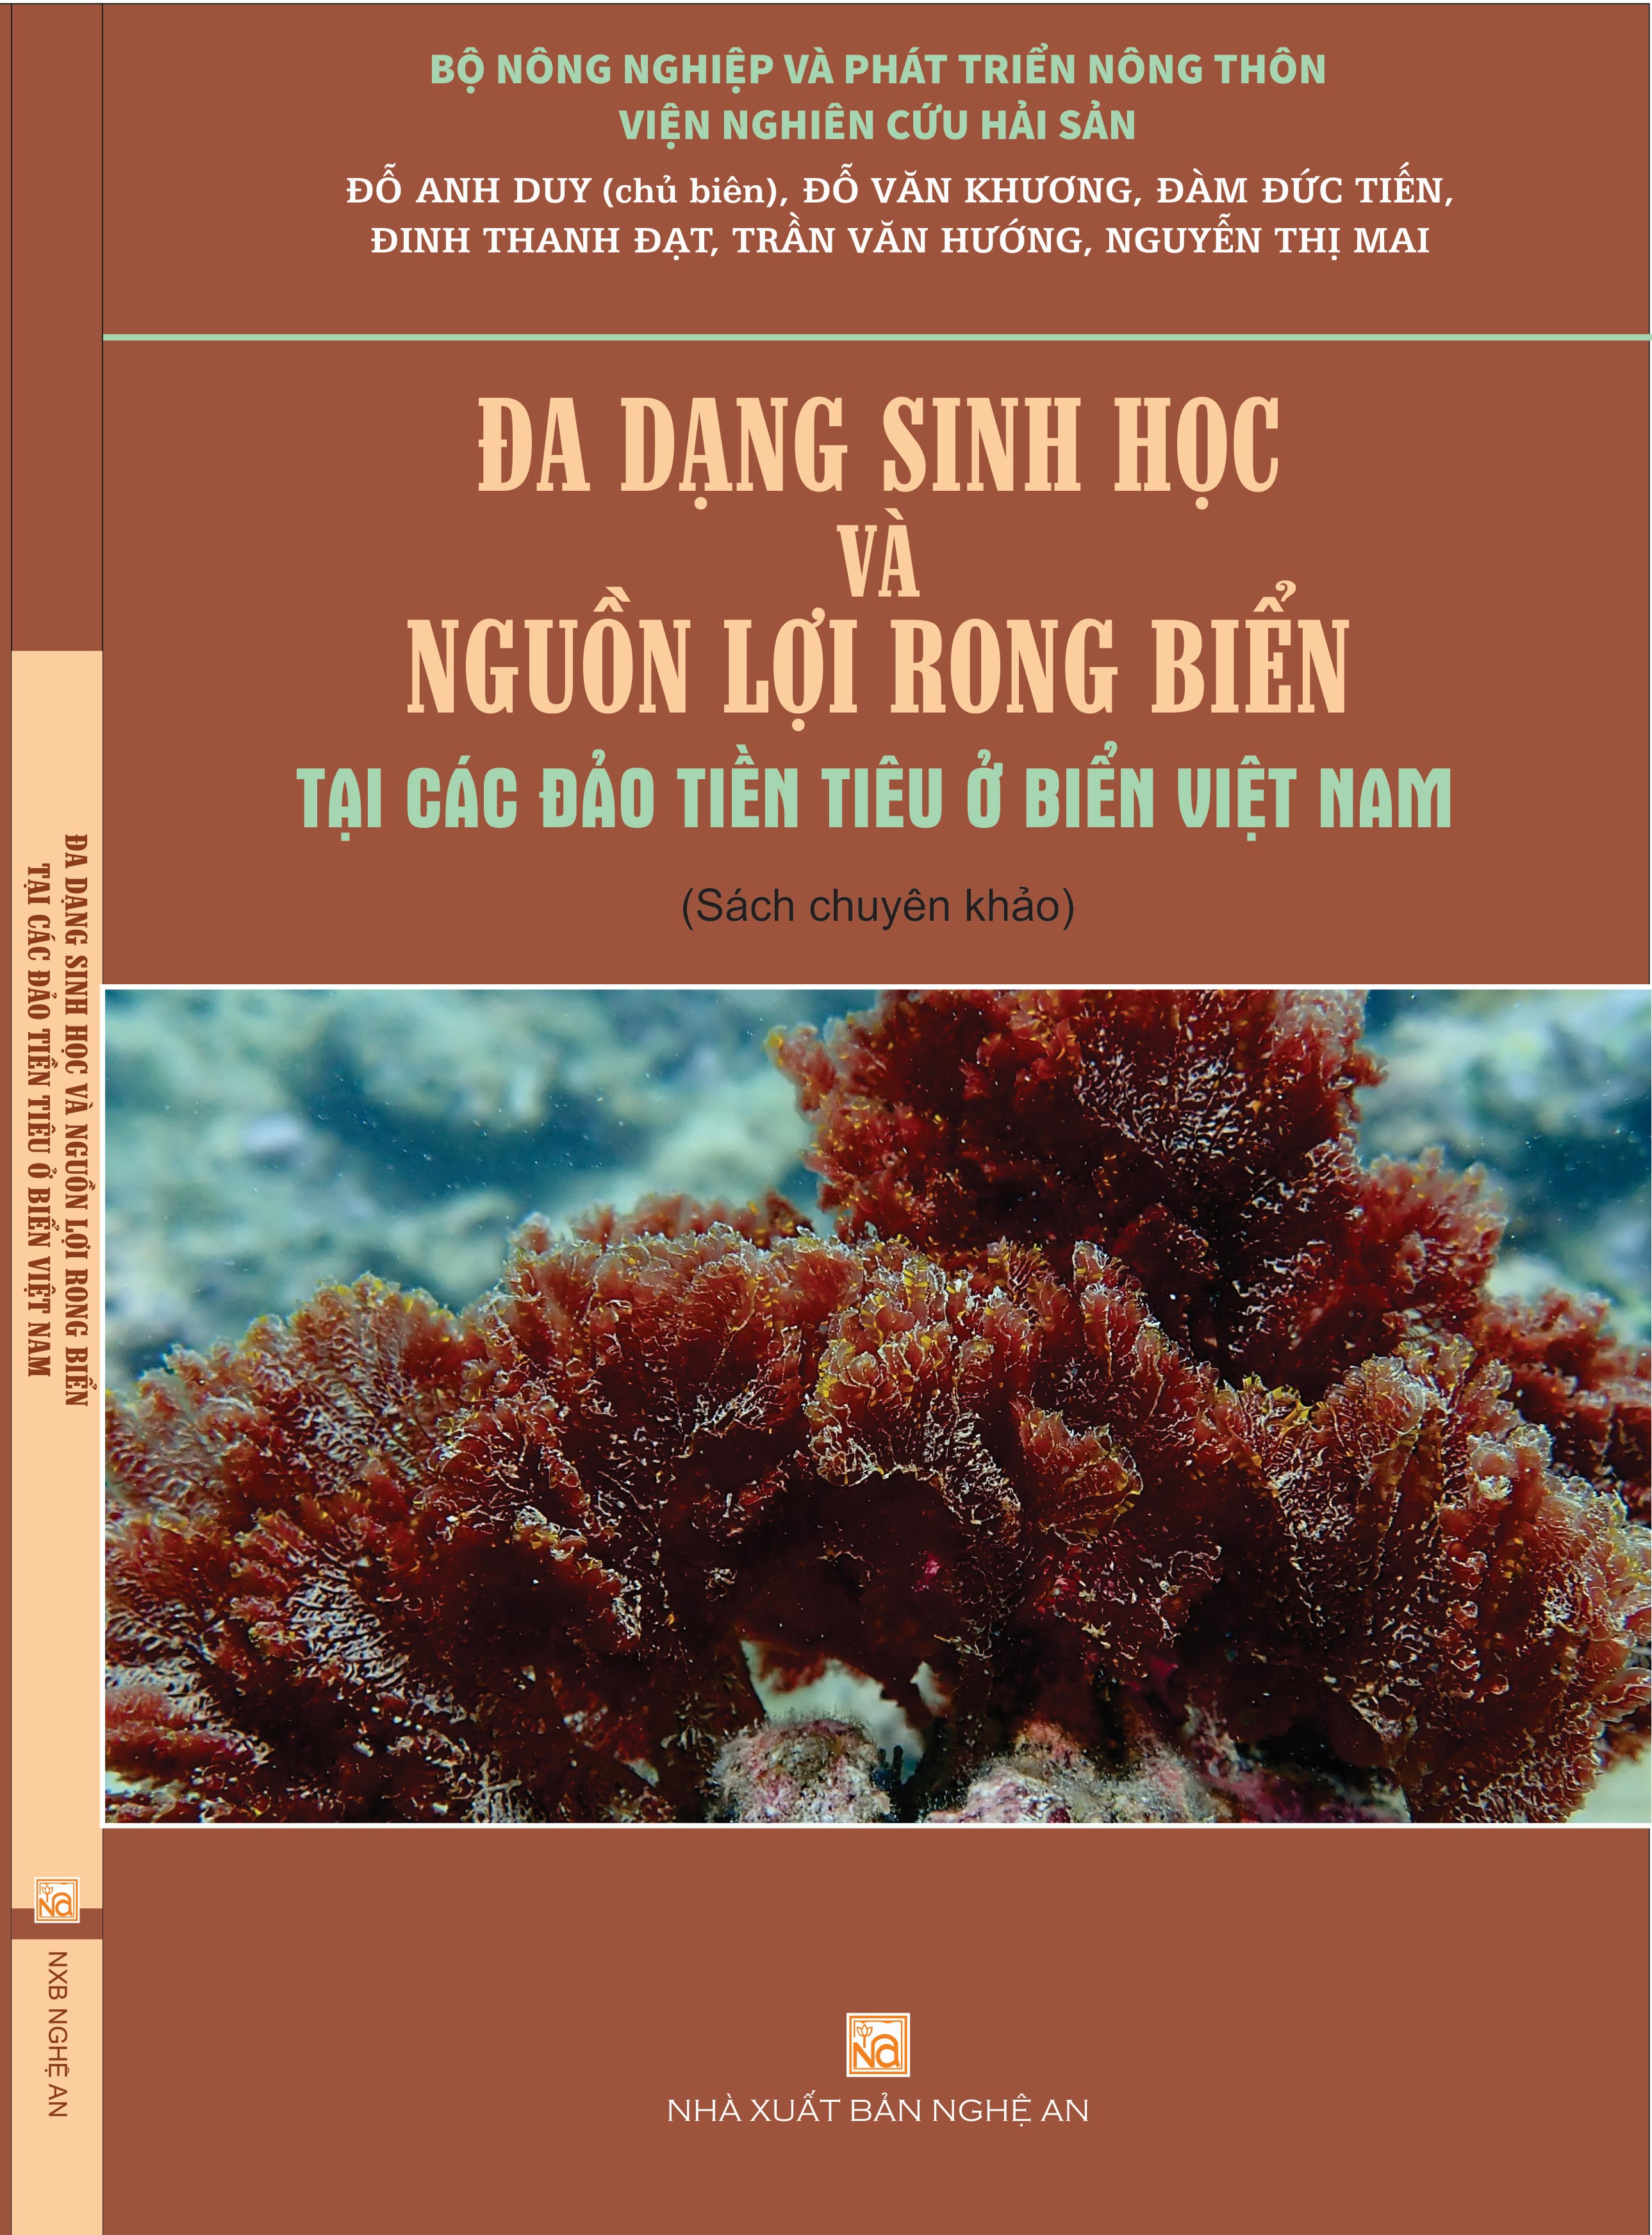 Biodiversity and seaweed resources at the oﬀ shore islands in Vietnam